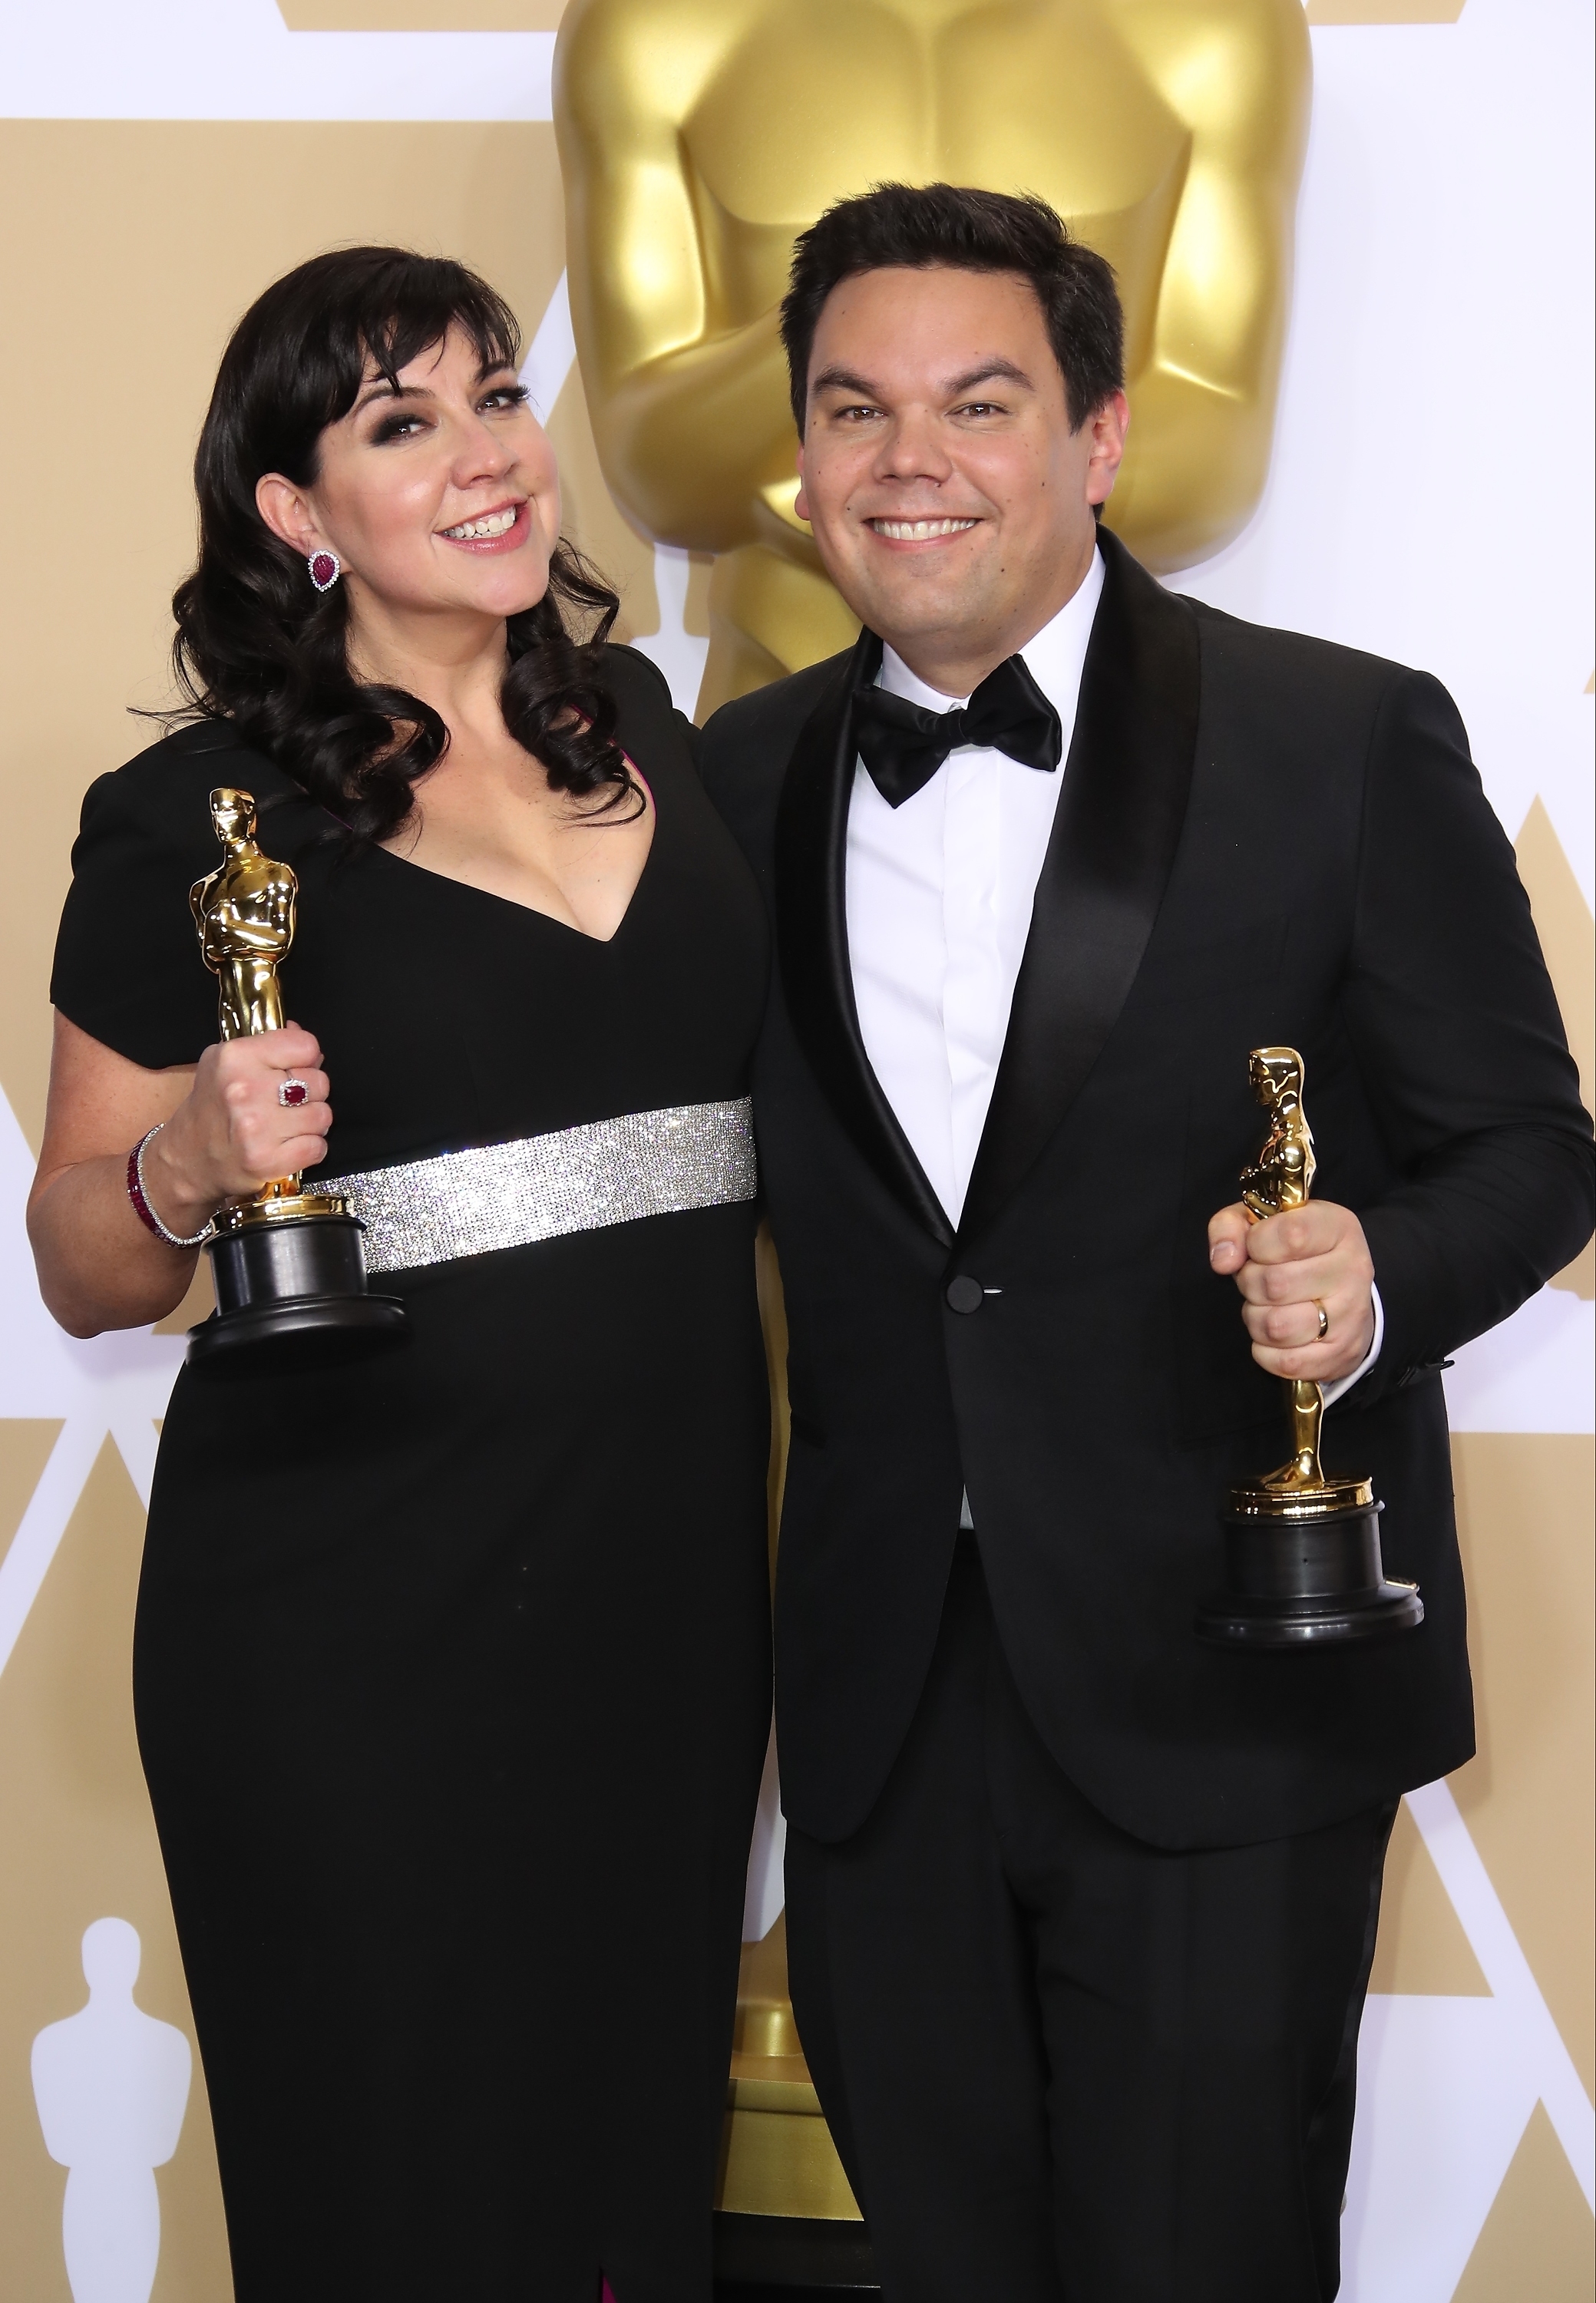 Robert Lopez and his partner with their Oscars